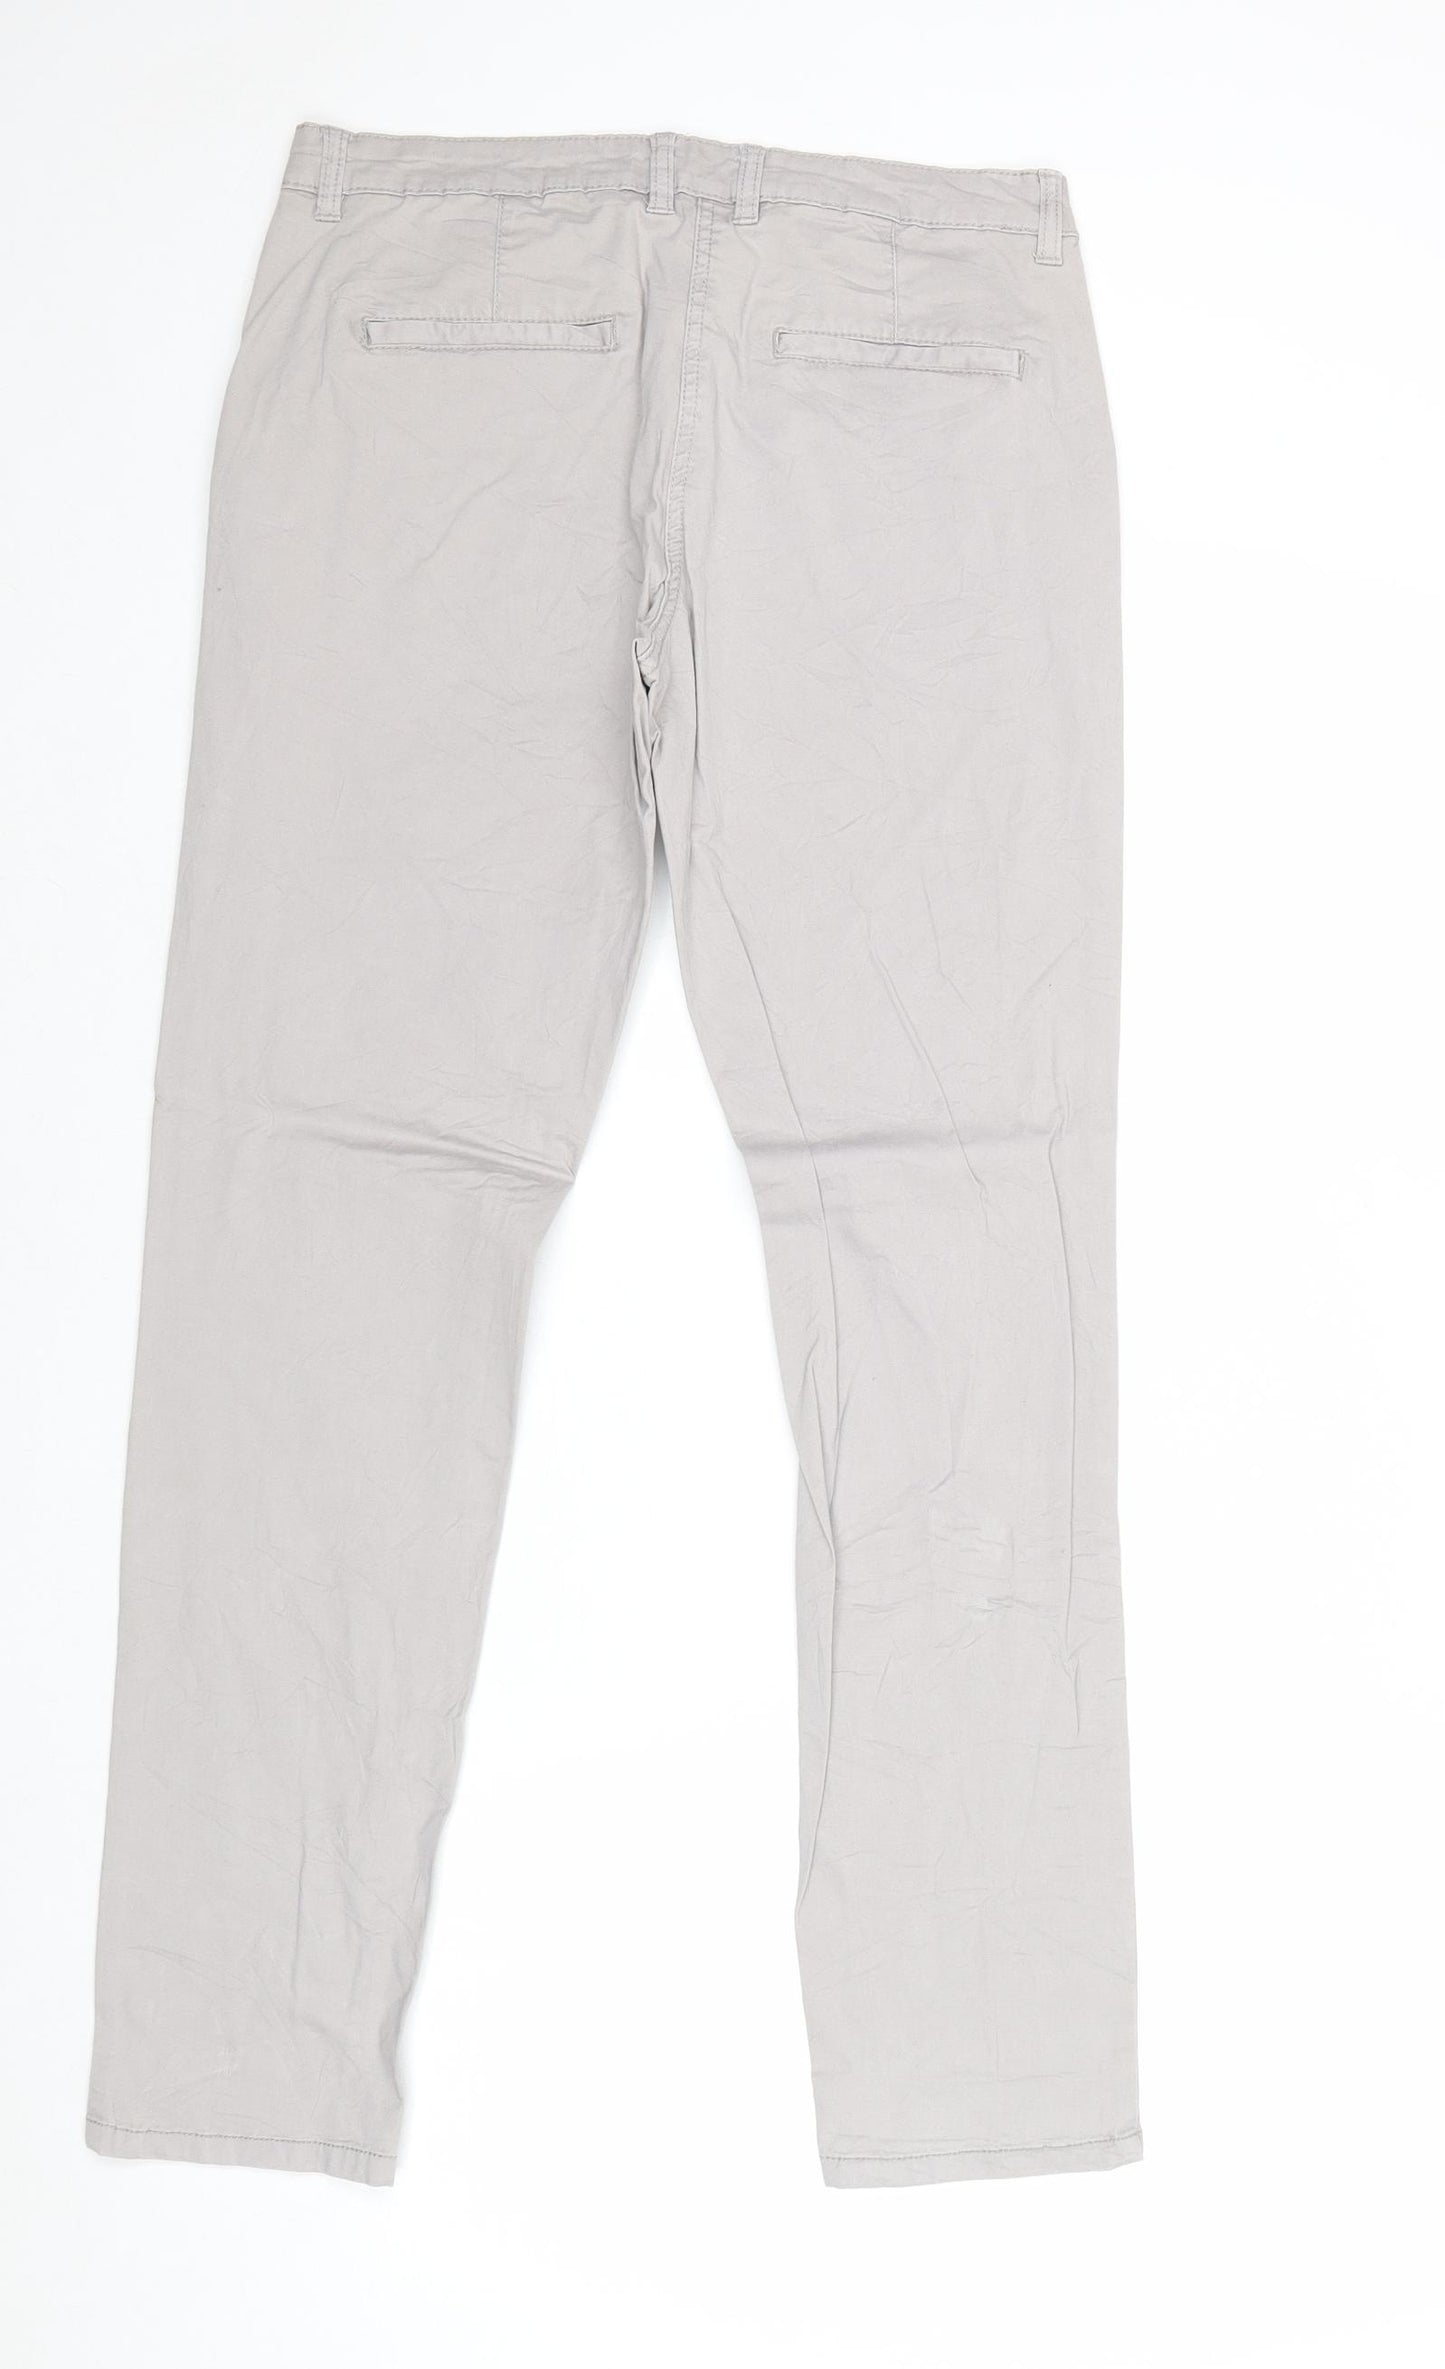 Blue Motion Mens Grey Cotton Chino Trousers Size 38 in Regular Zip